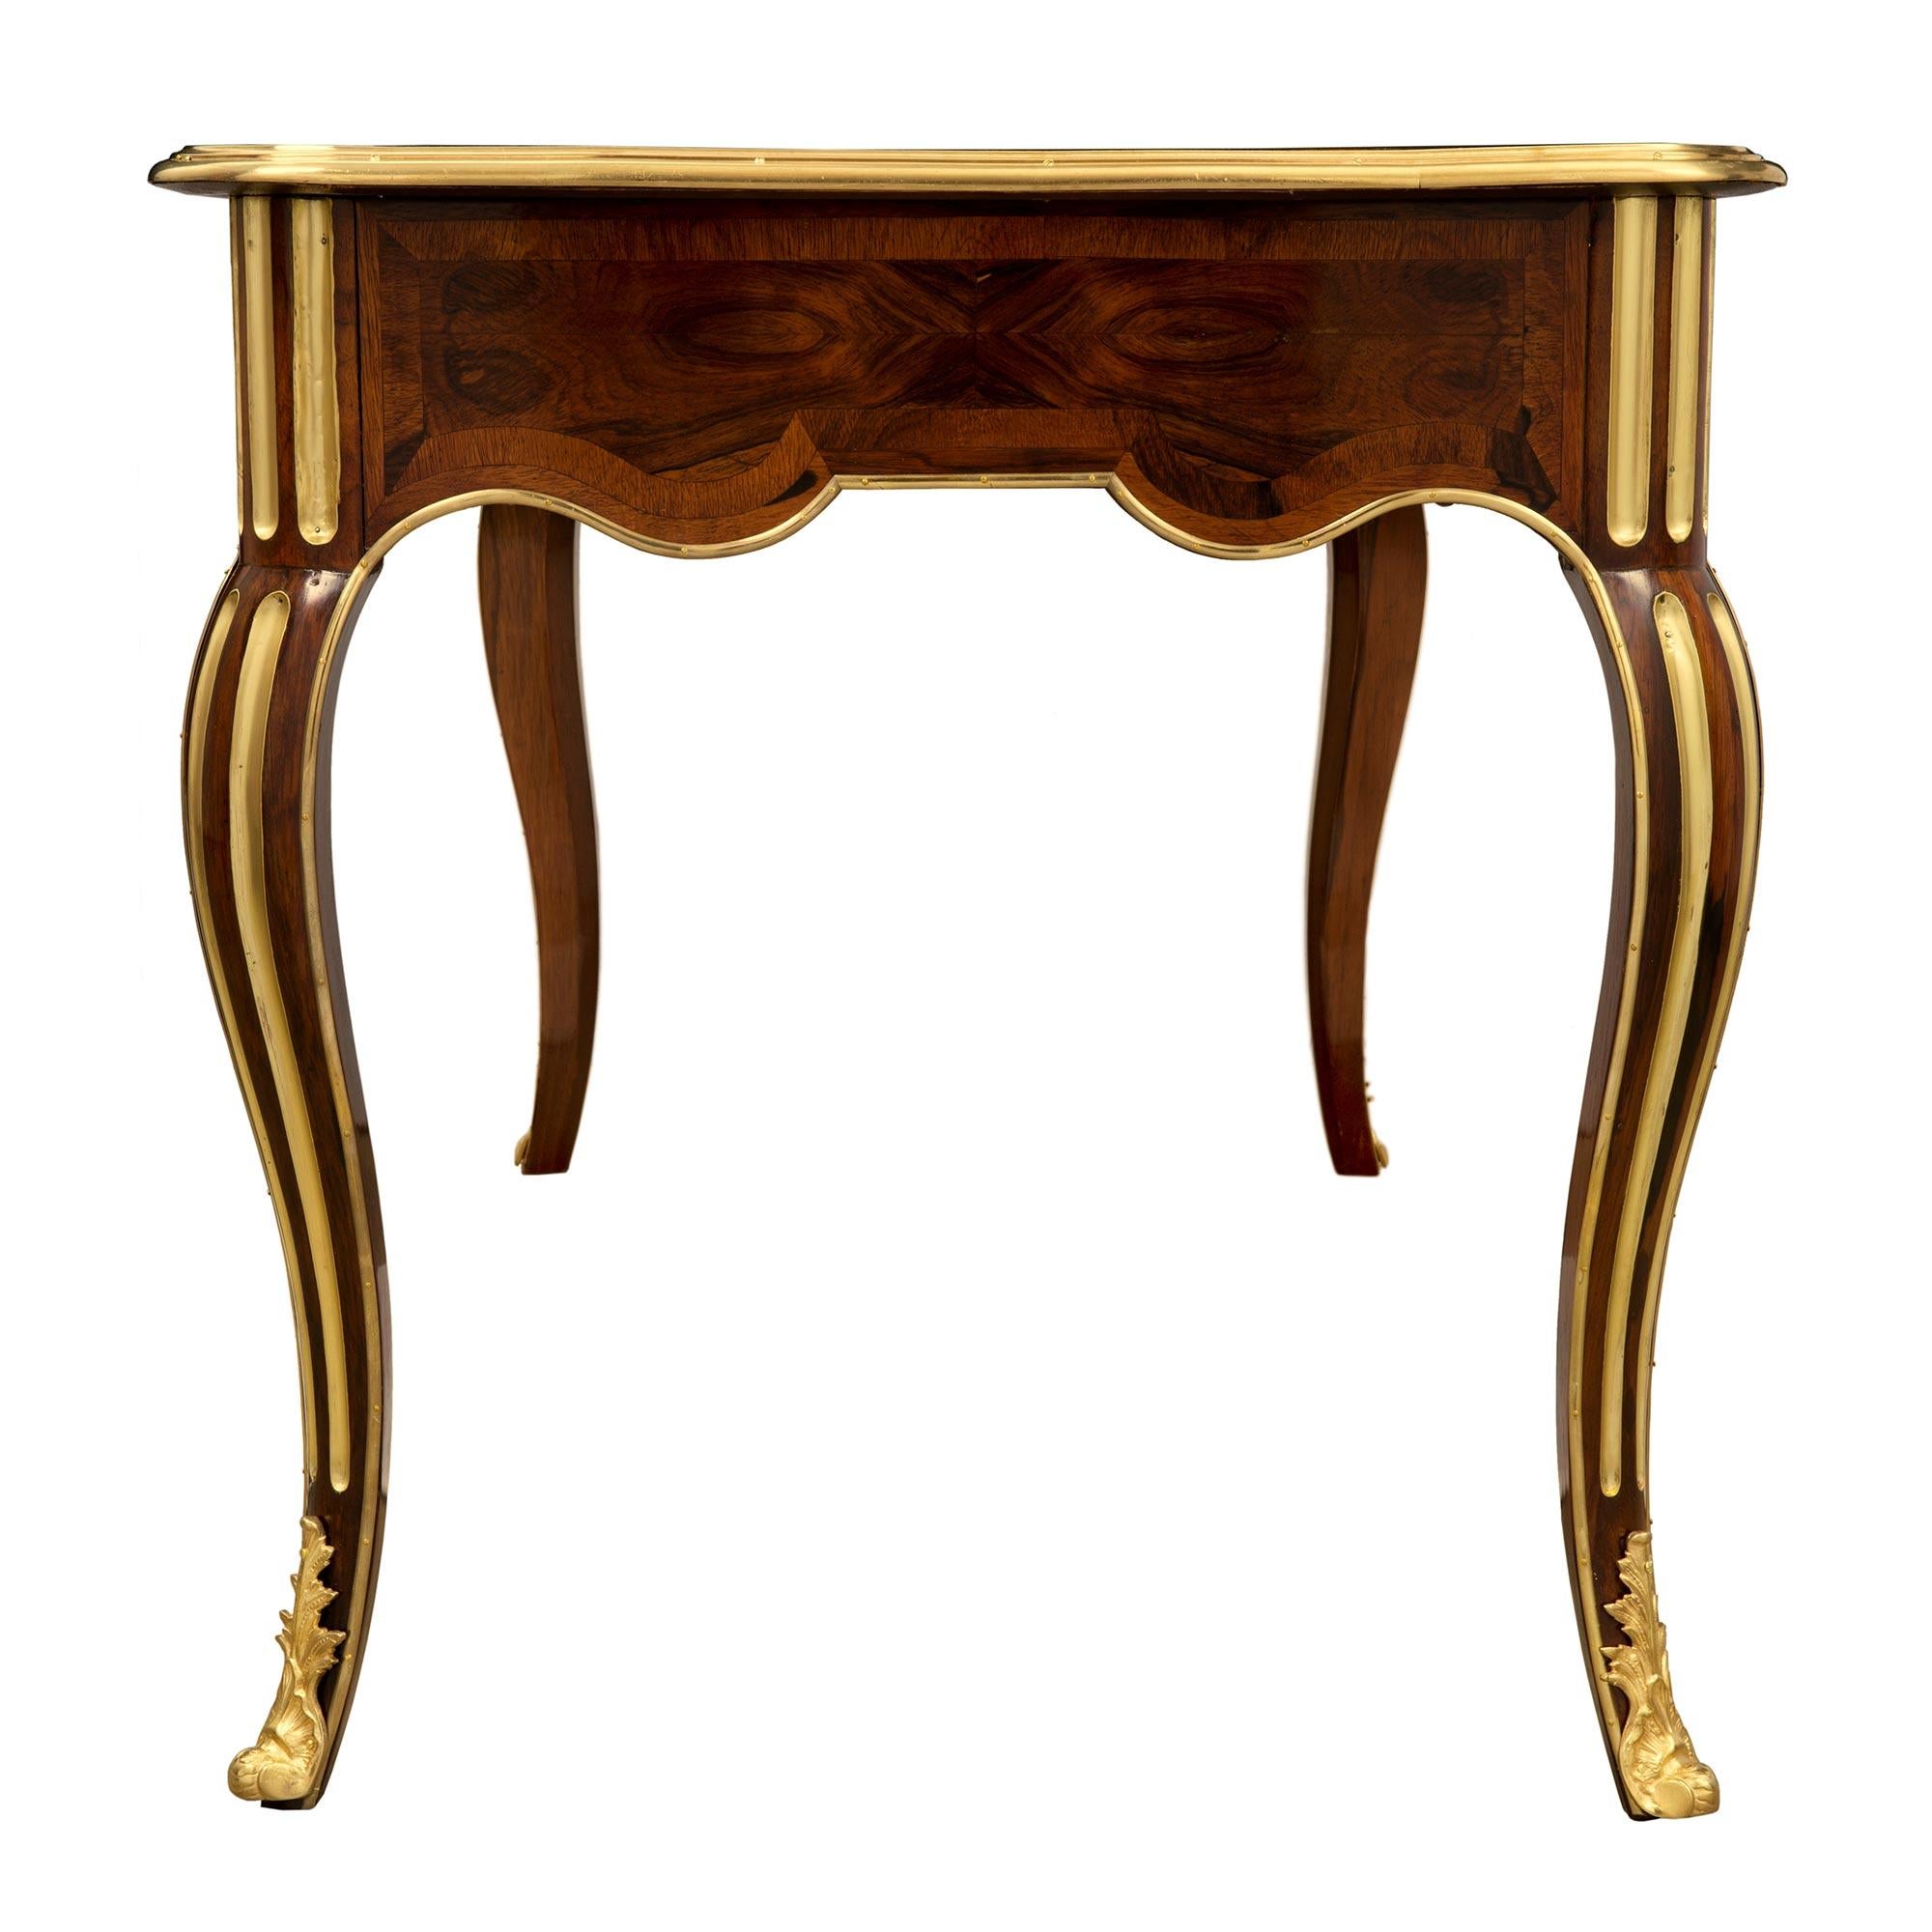 French 19th Century Regence Style Rosewood, Ormolu and Brass Desk For Sale 2